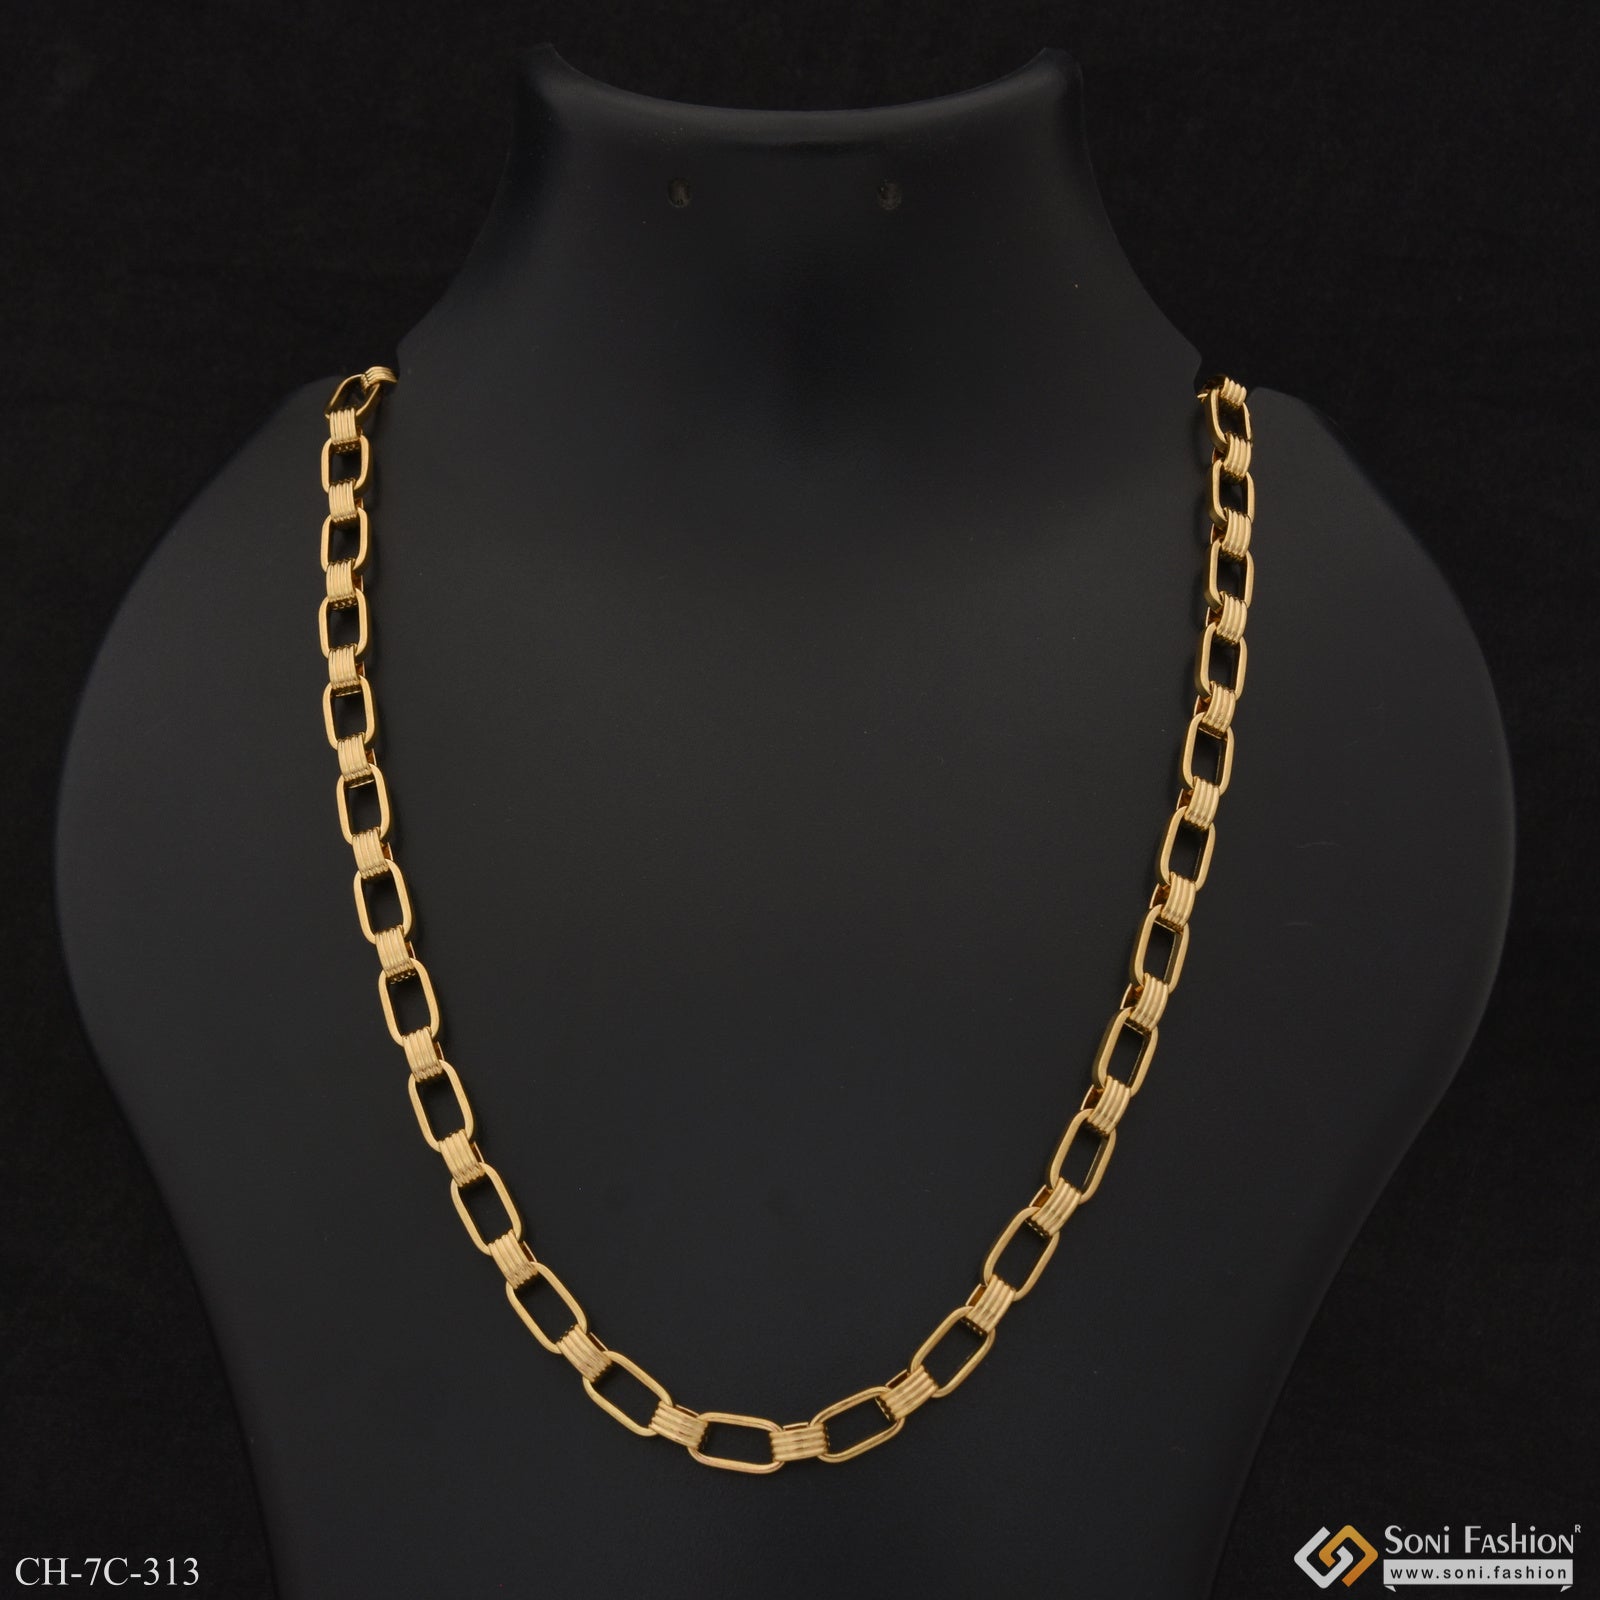 Cool Design Superior Quality Dainty Design Best Quality Chain for Men - Style C313